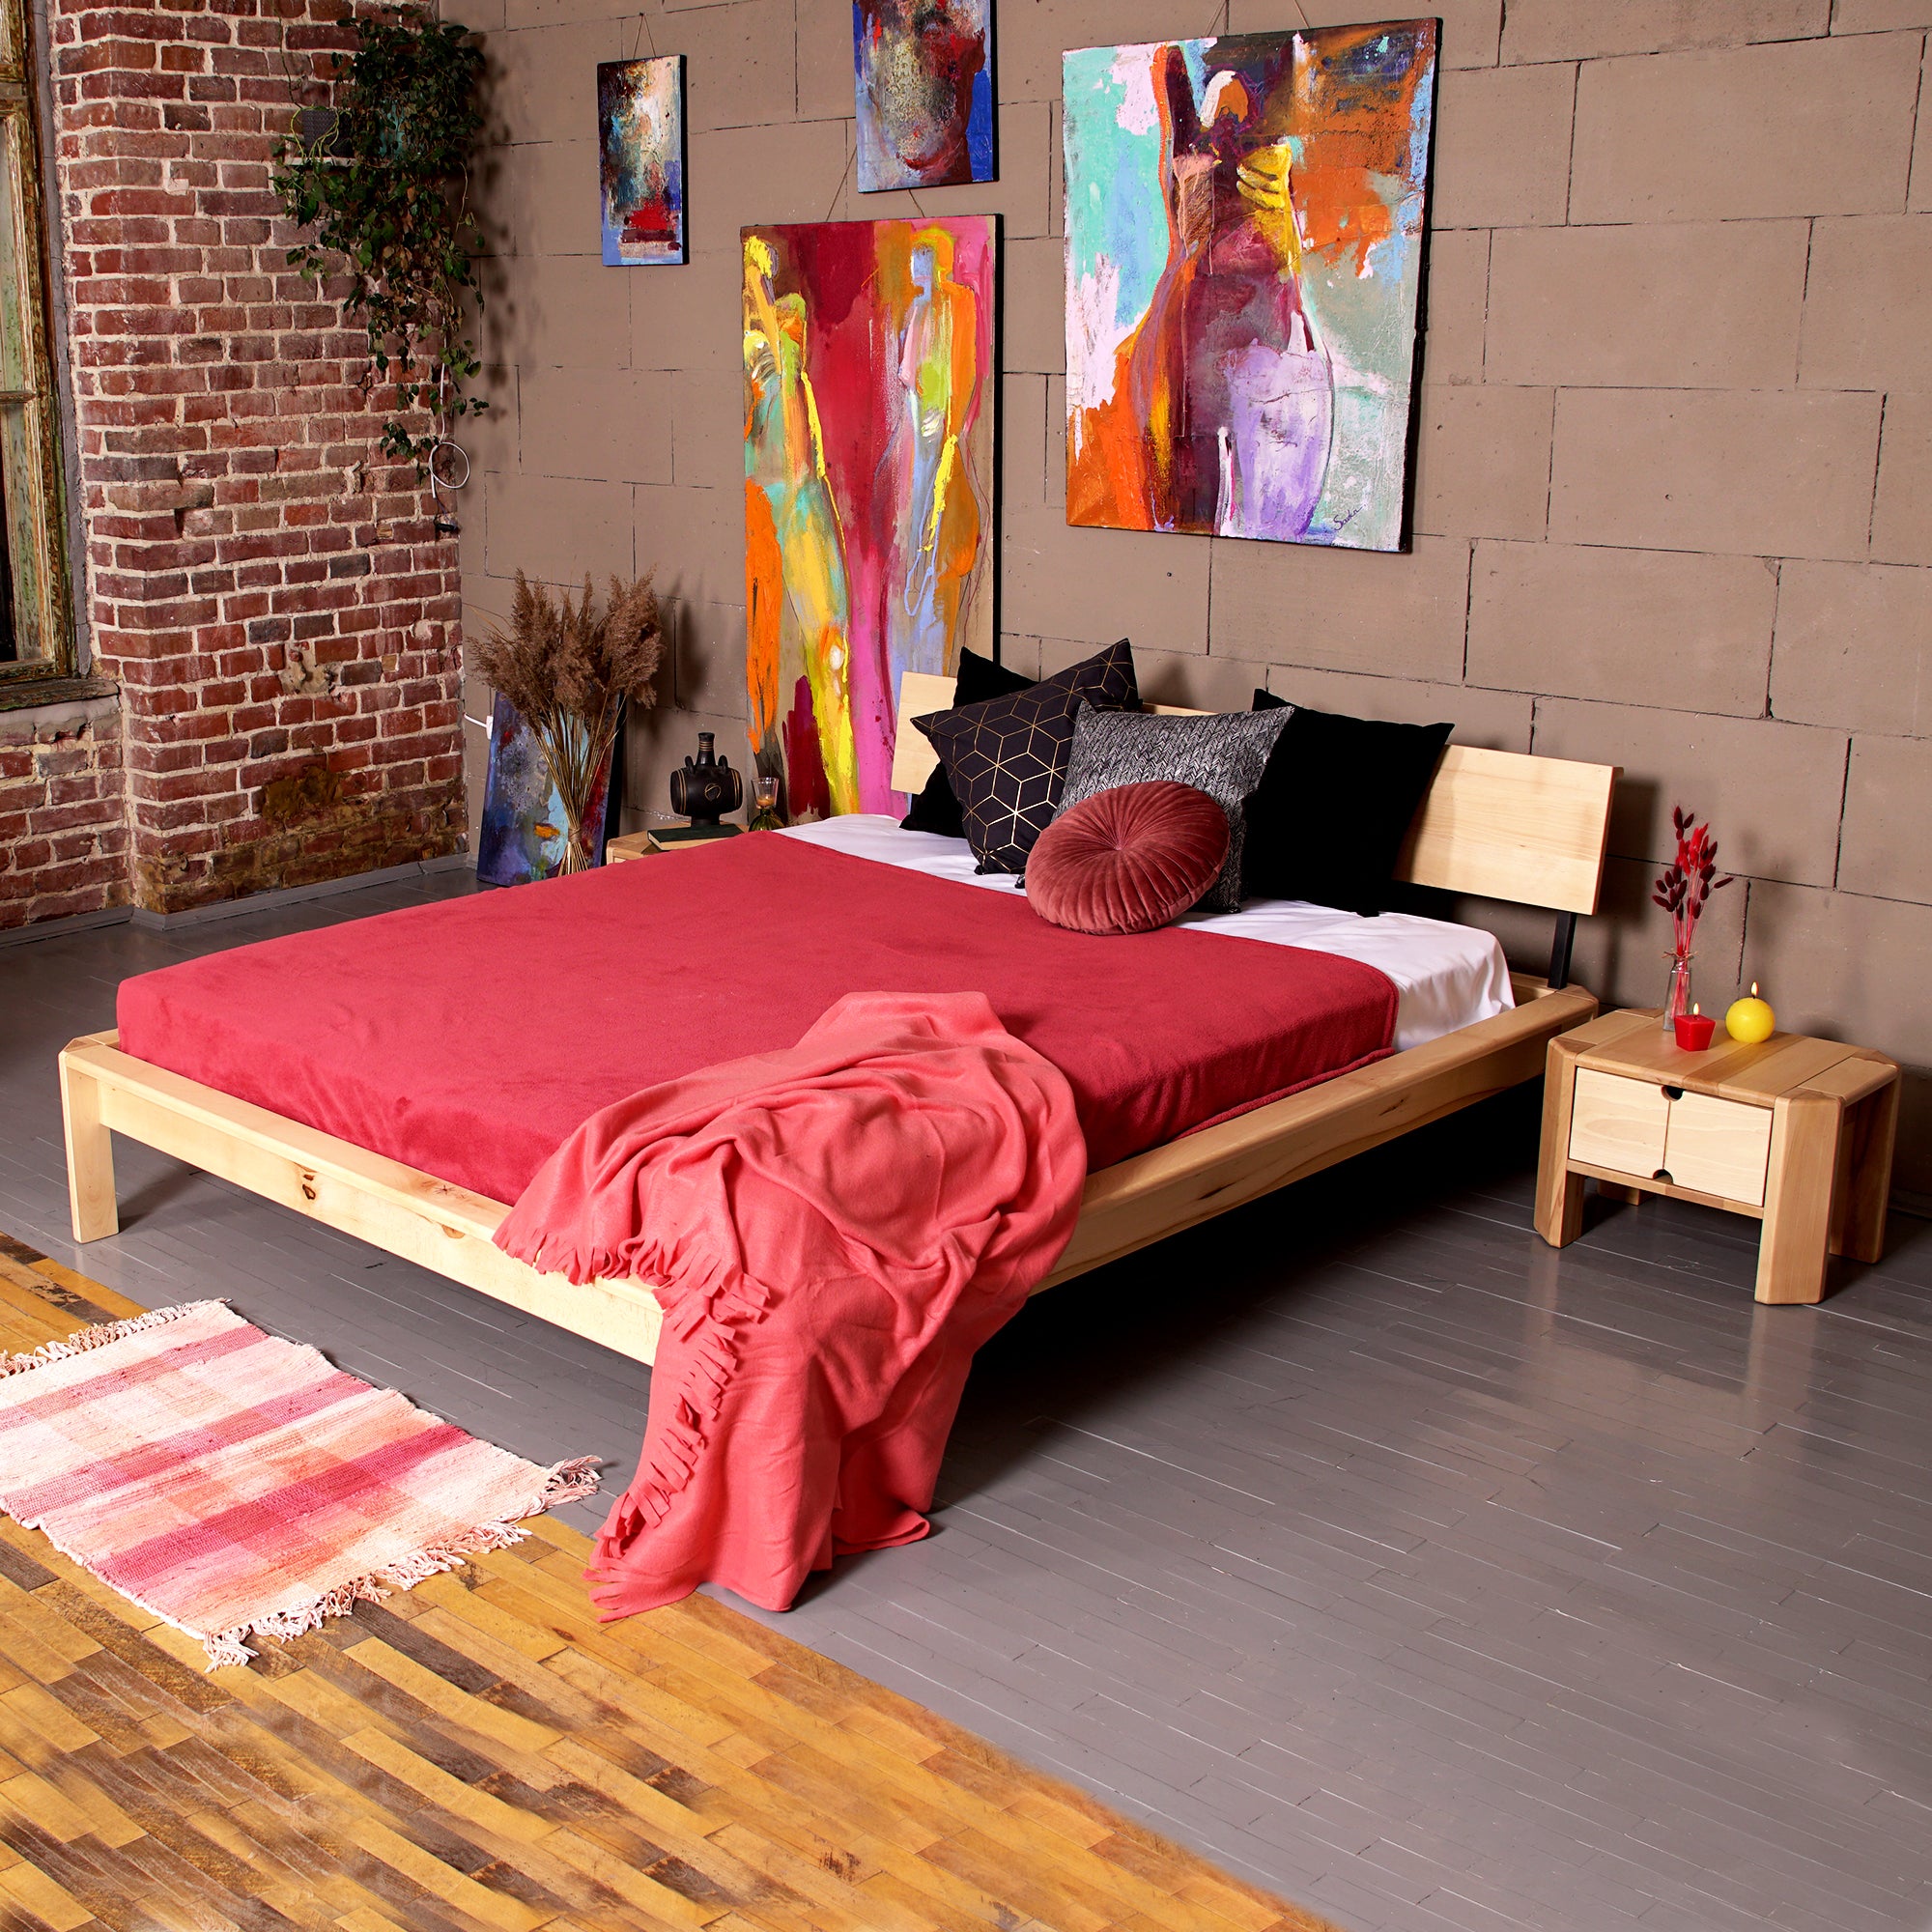 LOFT Double Bed-interior view-natural colour frame